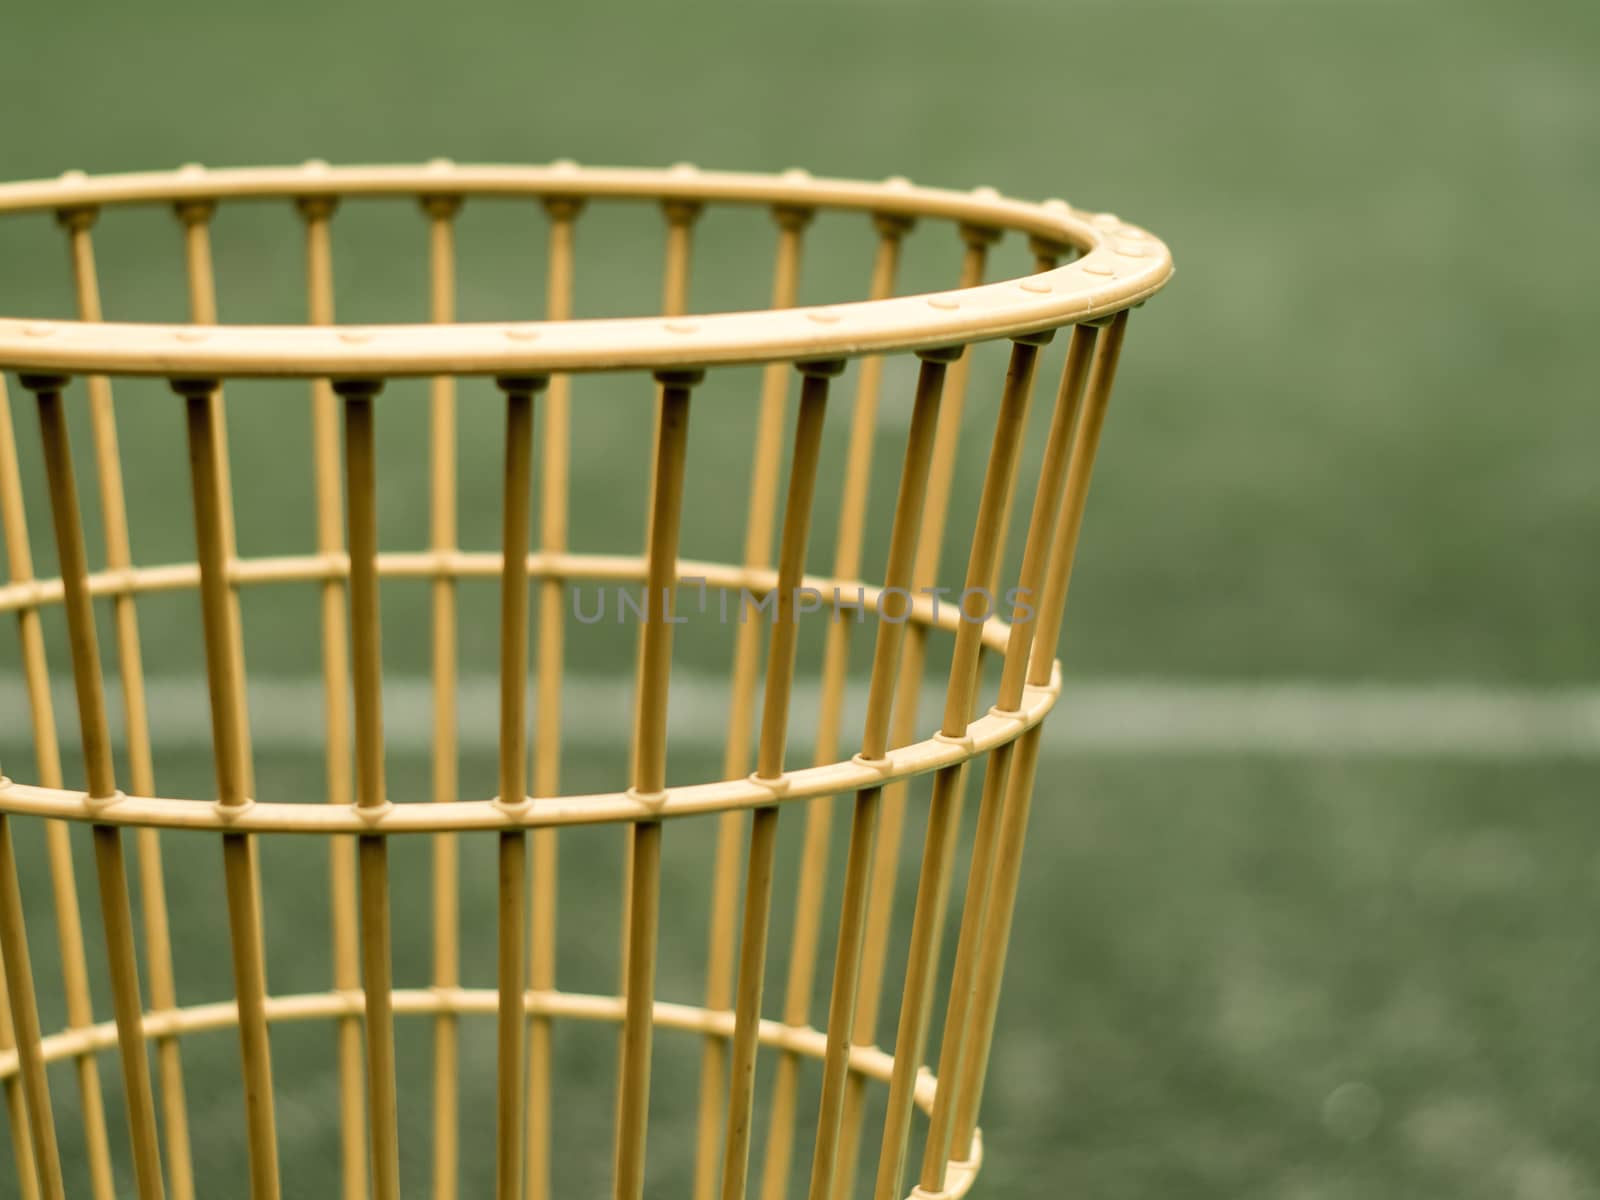 The basket of chairball game beside the field